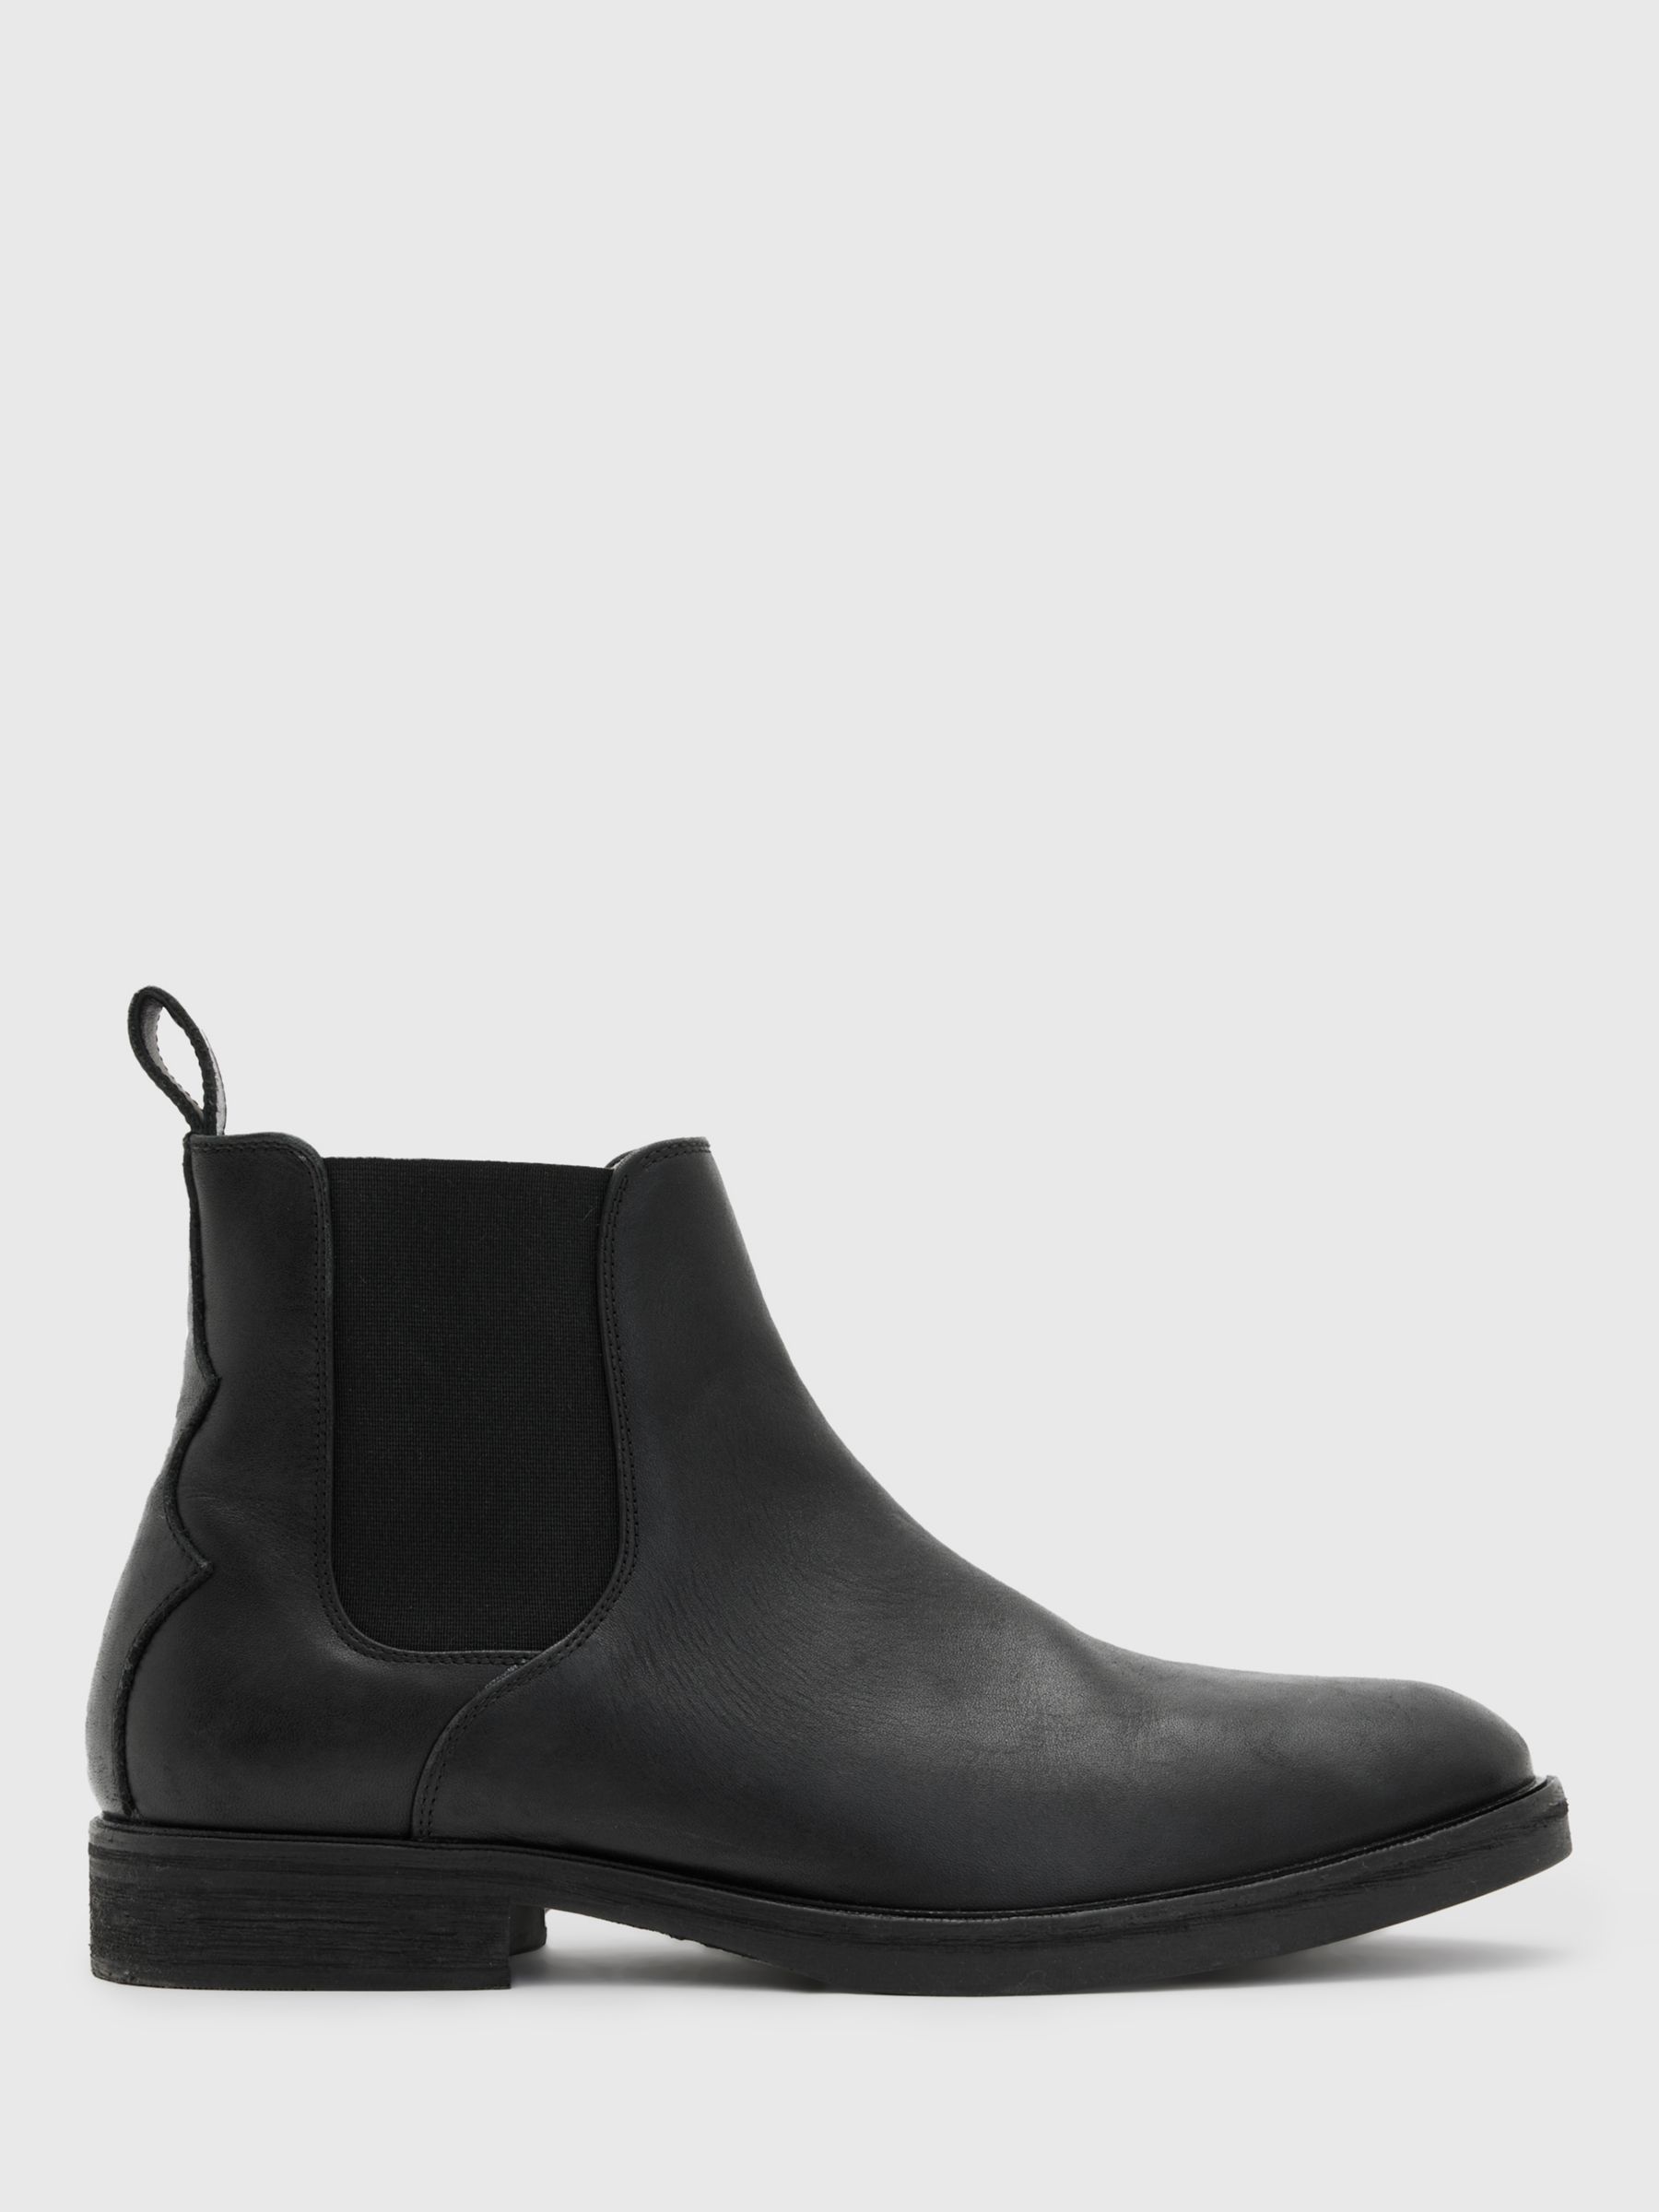 AllSaints Creed Leather Chelsea Boots, Black, 10